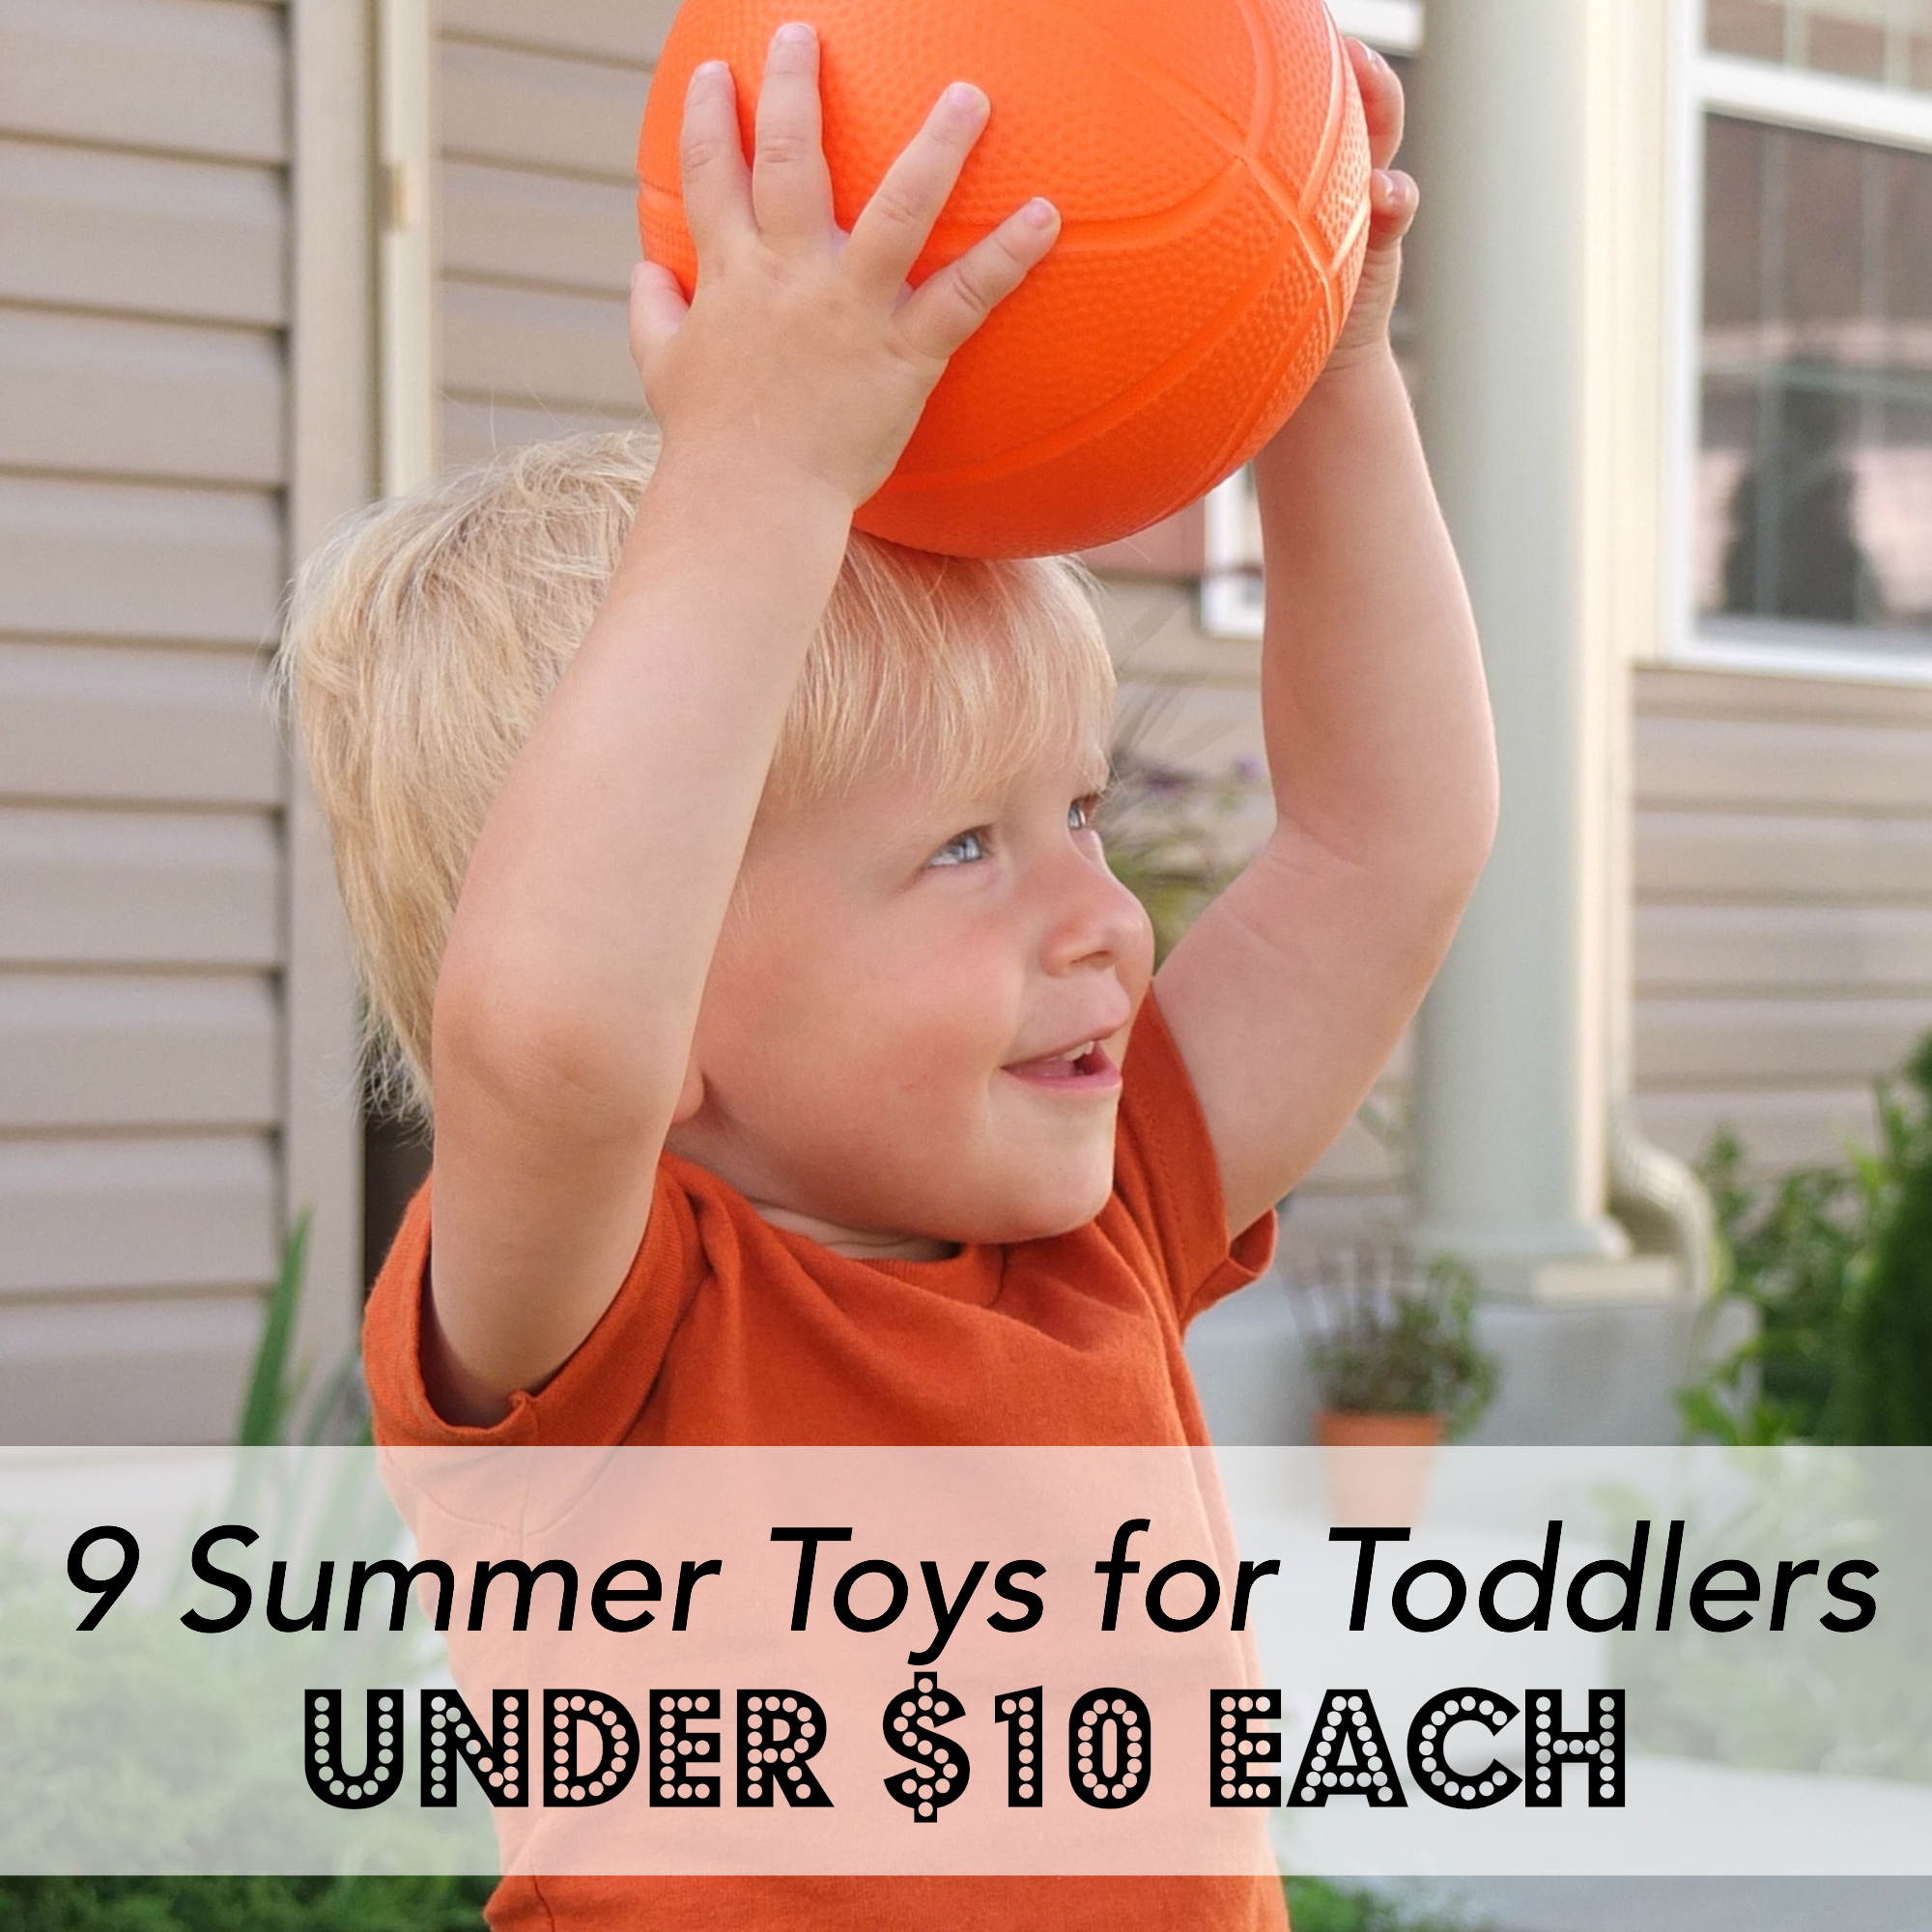 9 Summer Toys for Toddlers Under $10 Each